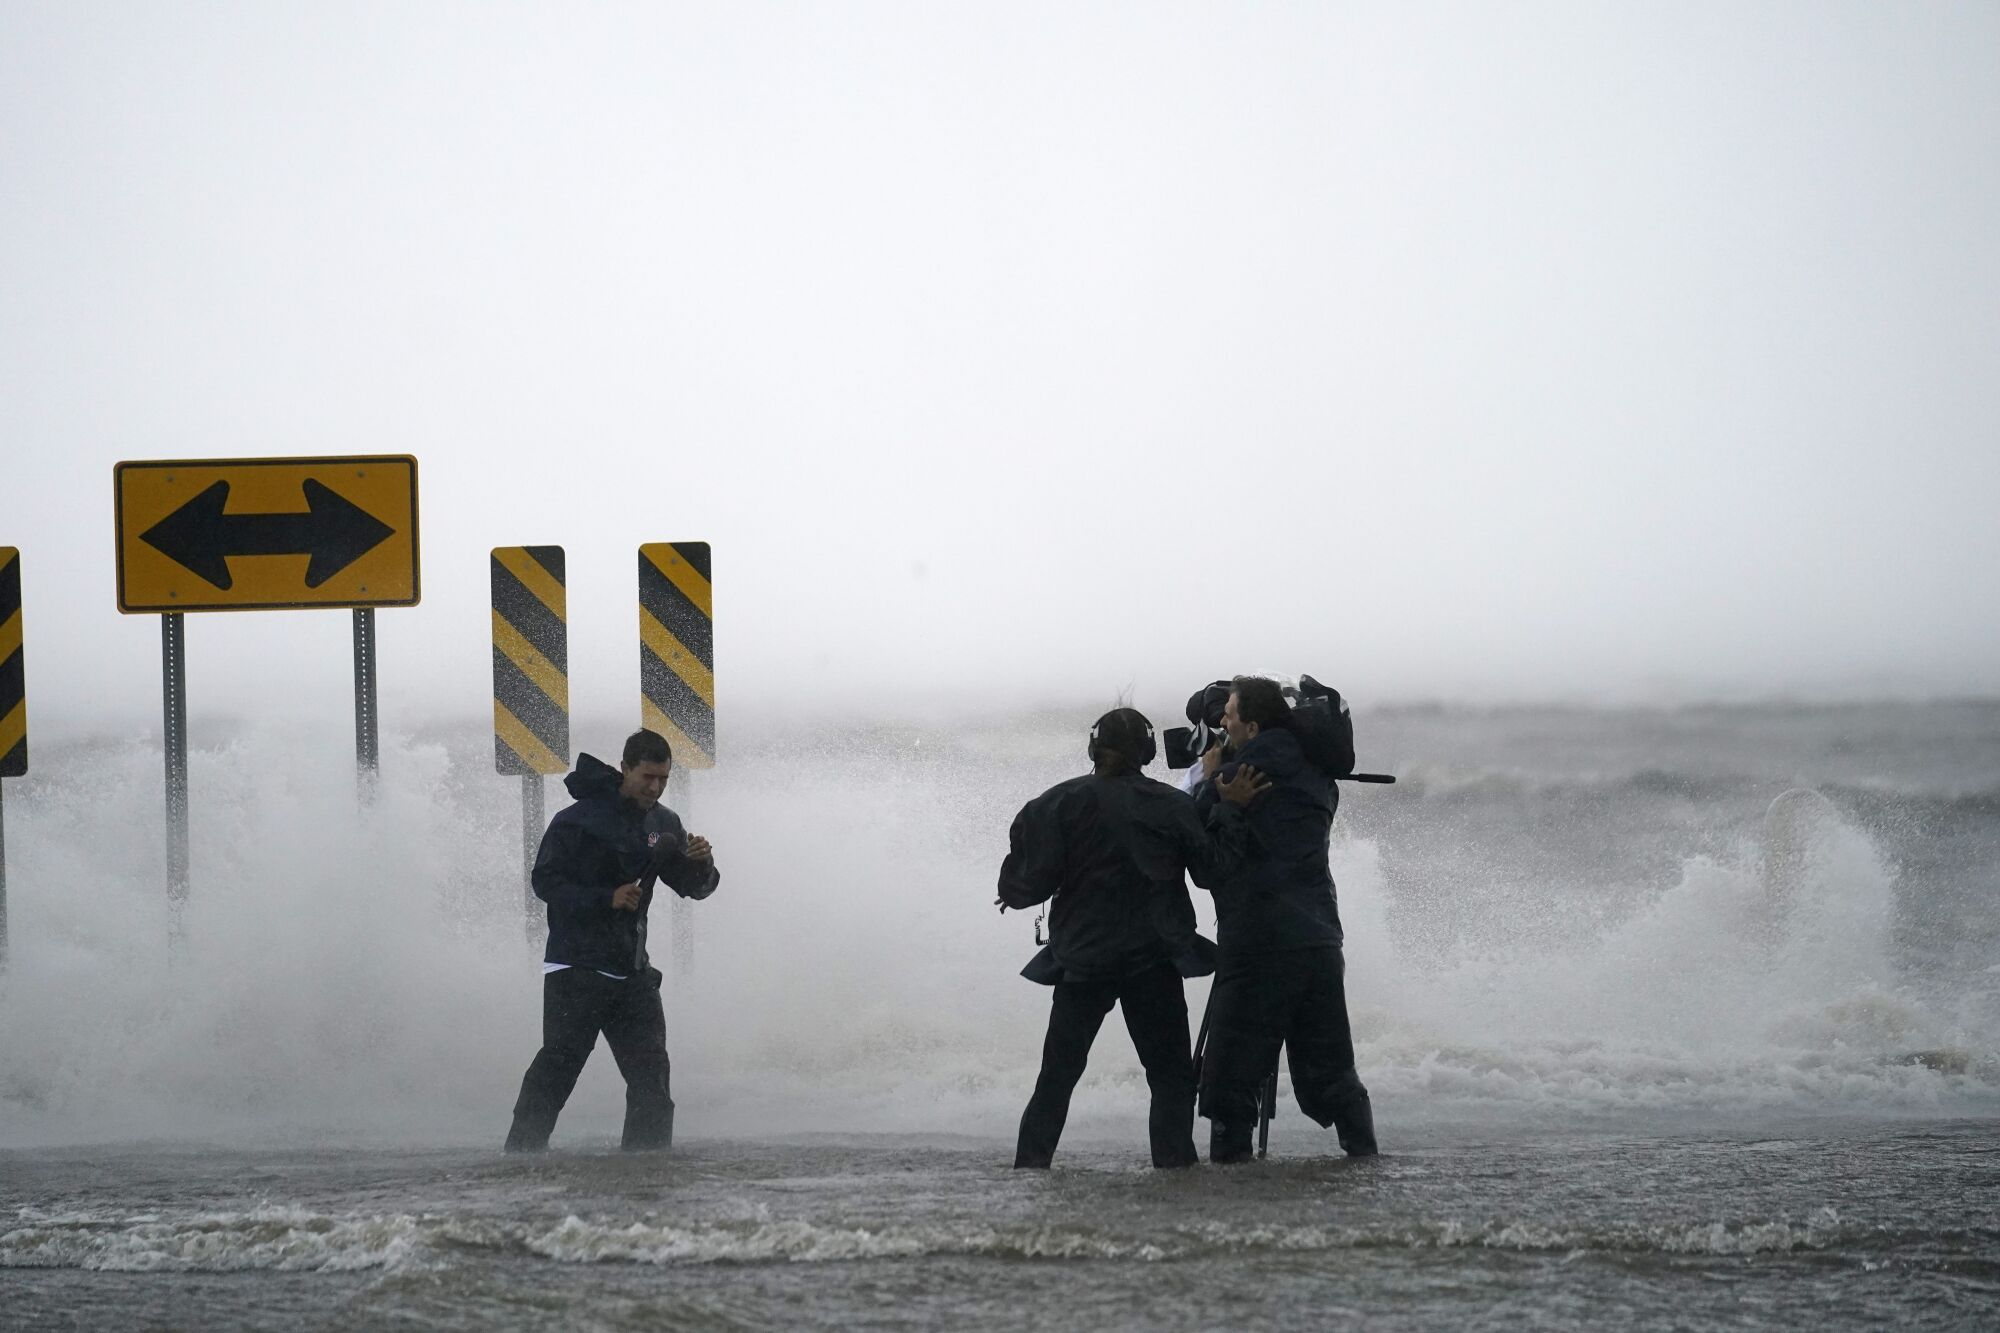 A camera crew films a reporter in rain and high water.